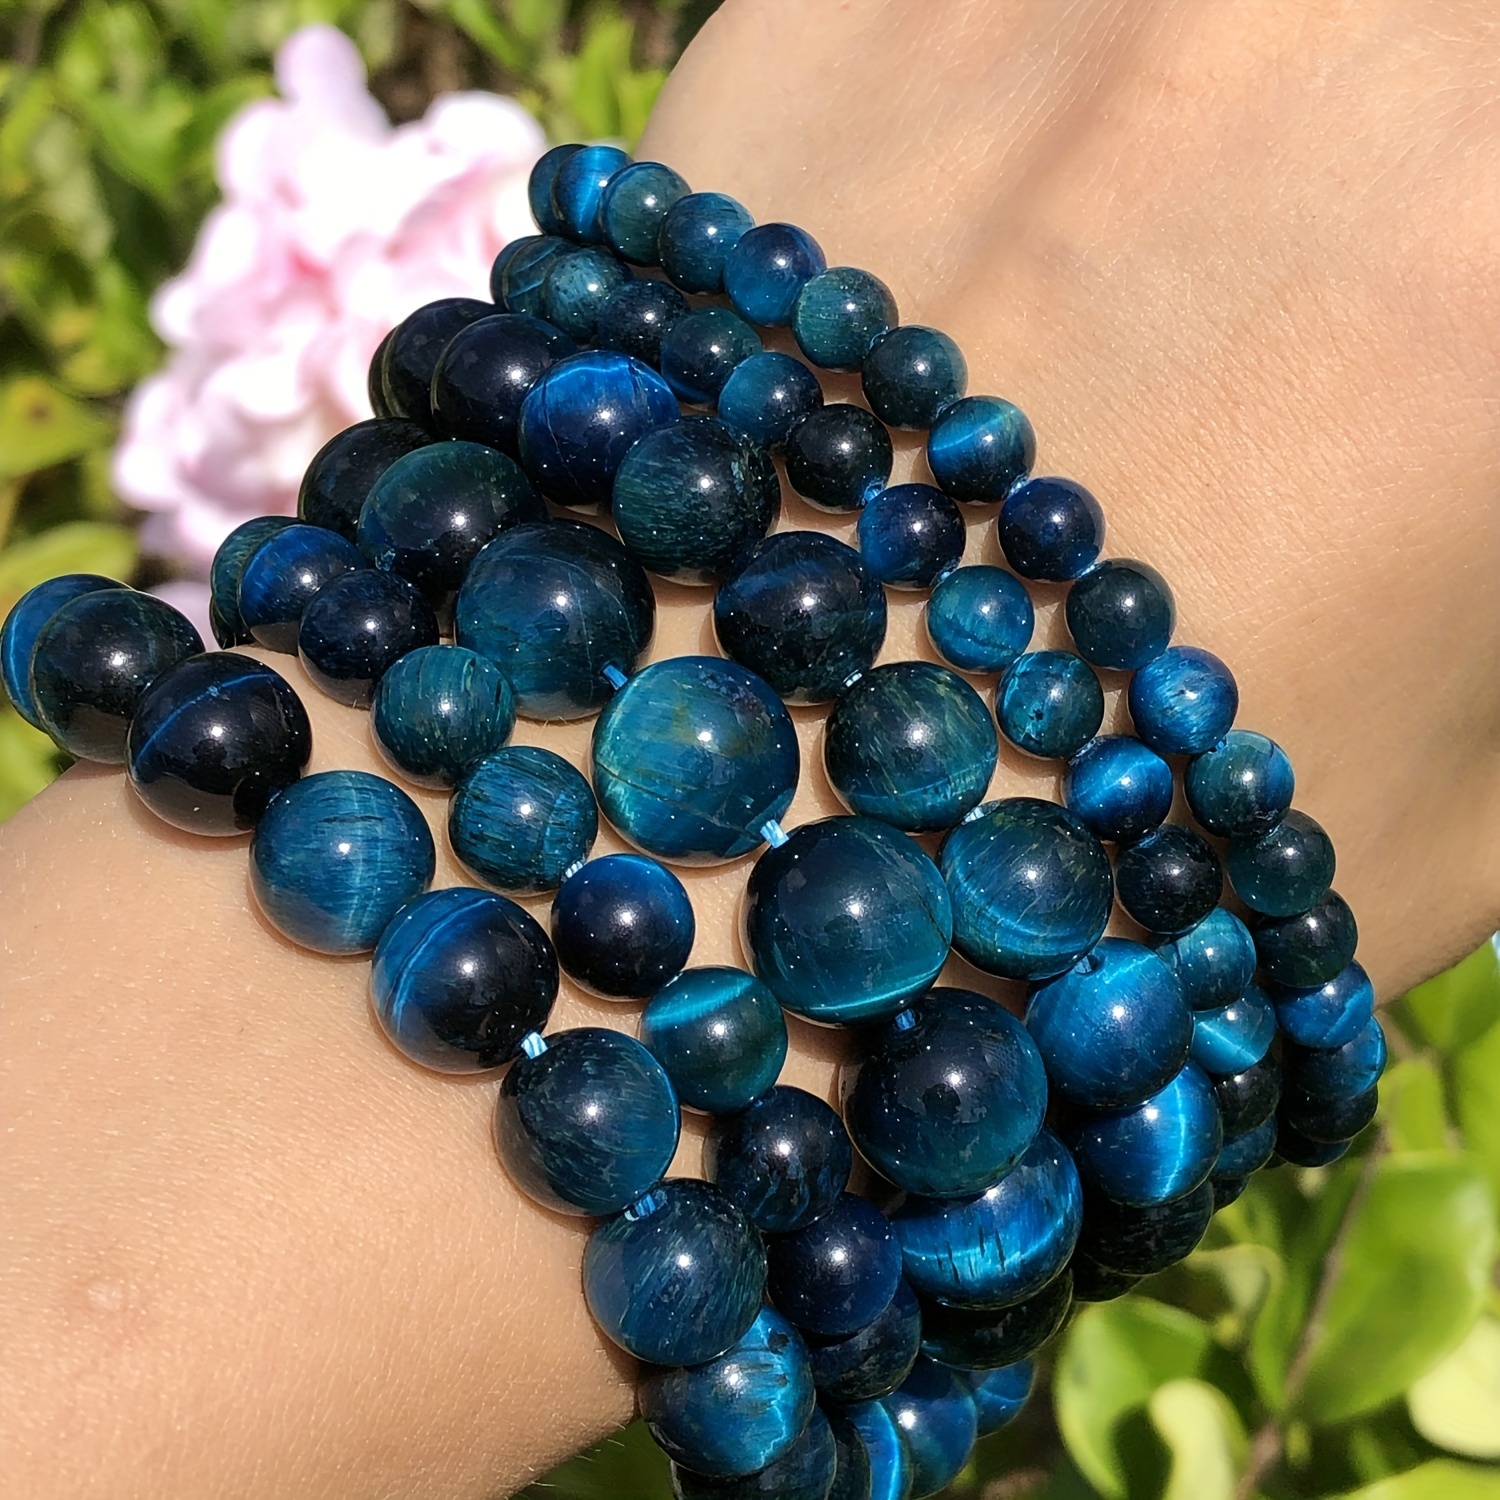 Person on  is selling these beads as blue tiger's eye and I am  considering getting them for a project I am working on. I know blue tiger's  eye is natural but